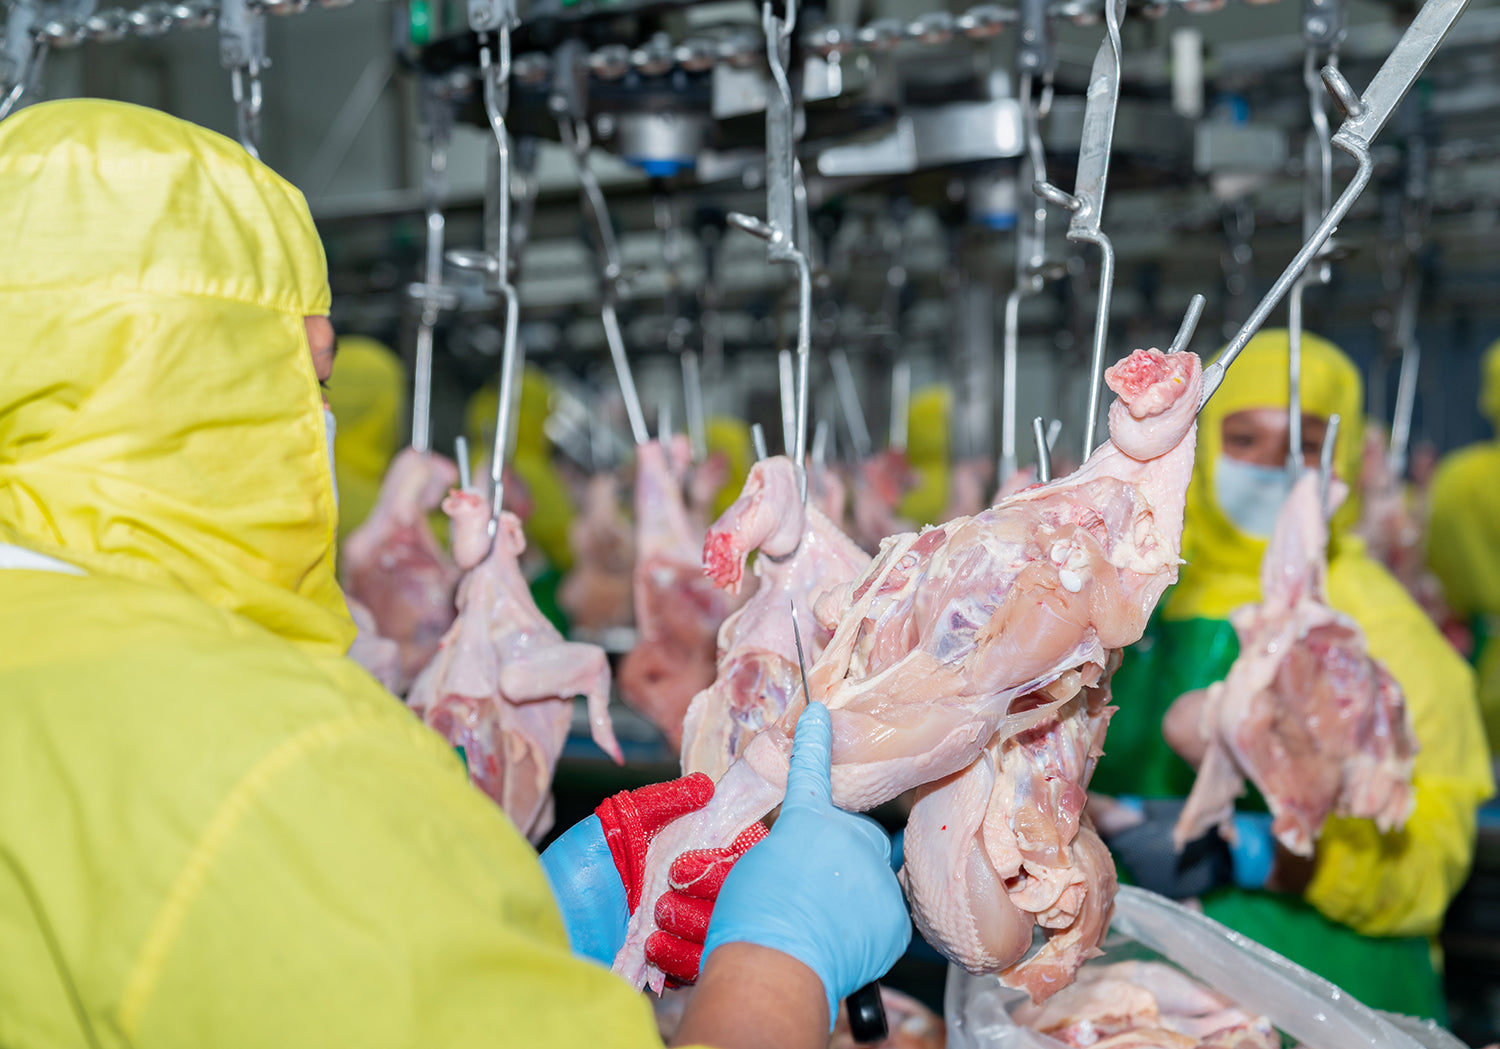 Wolff poultry knives in use on a processing line.